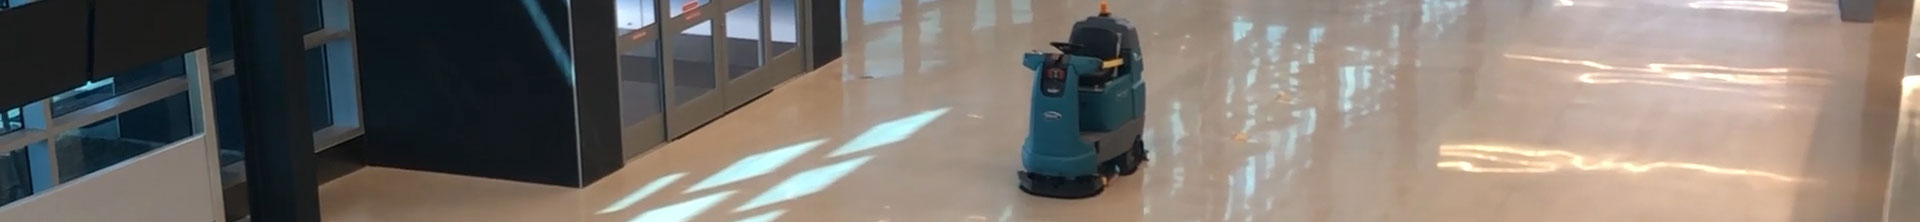 T7AMR Robotic Floor Scrubber cleaning airport